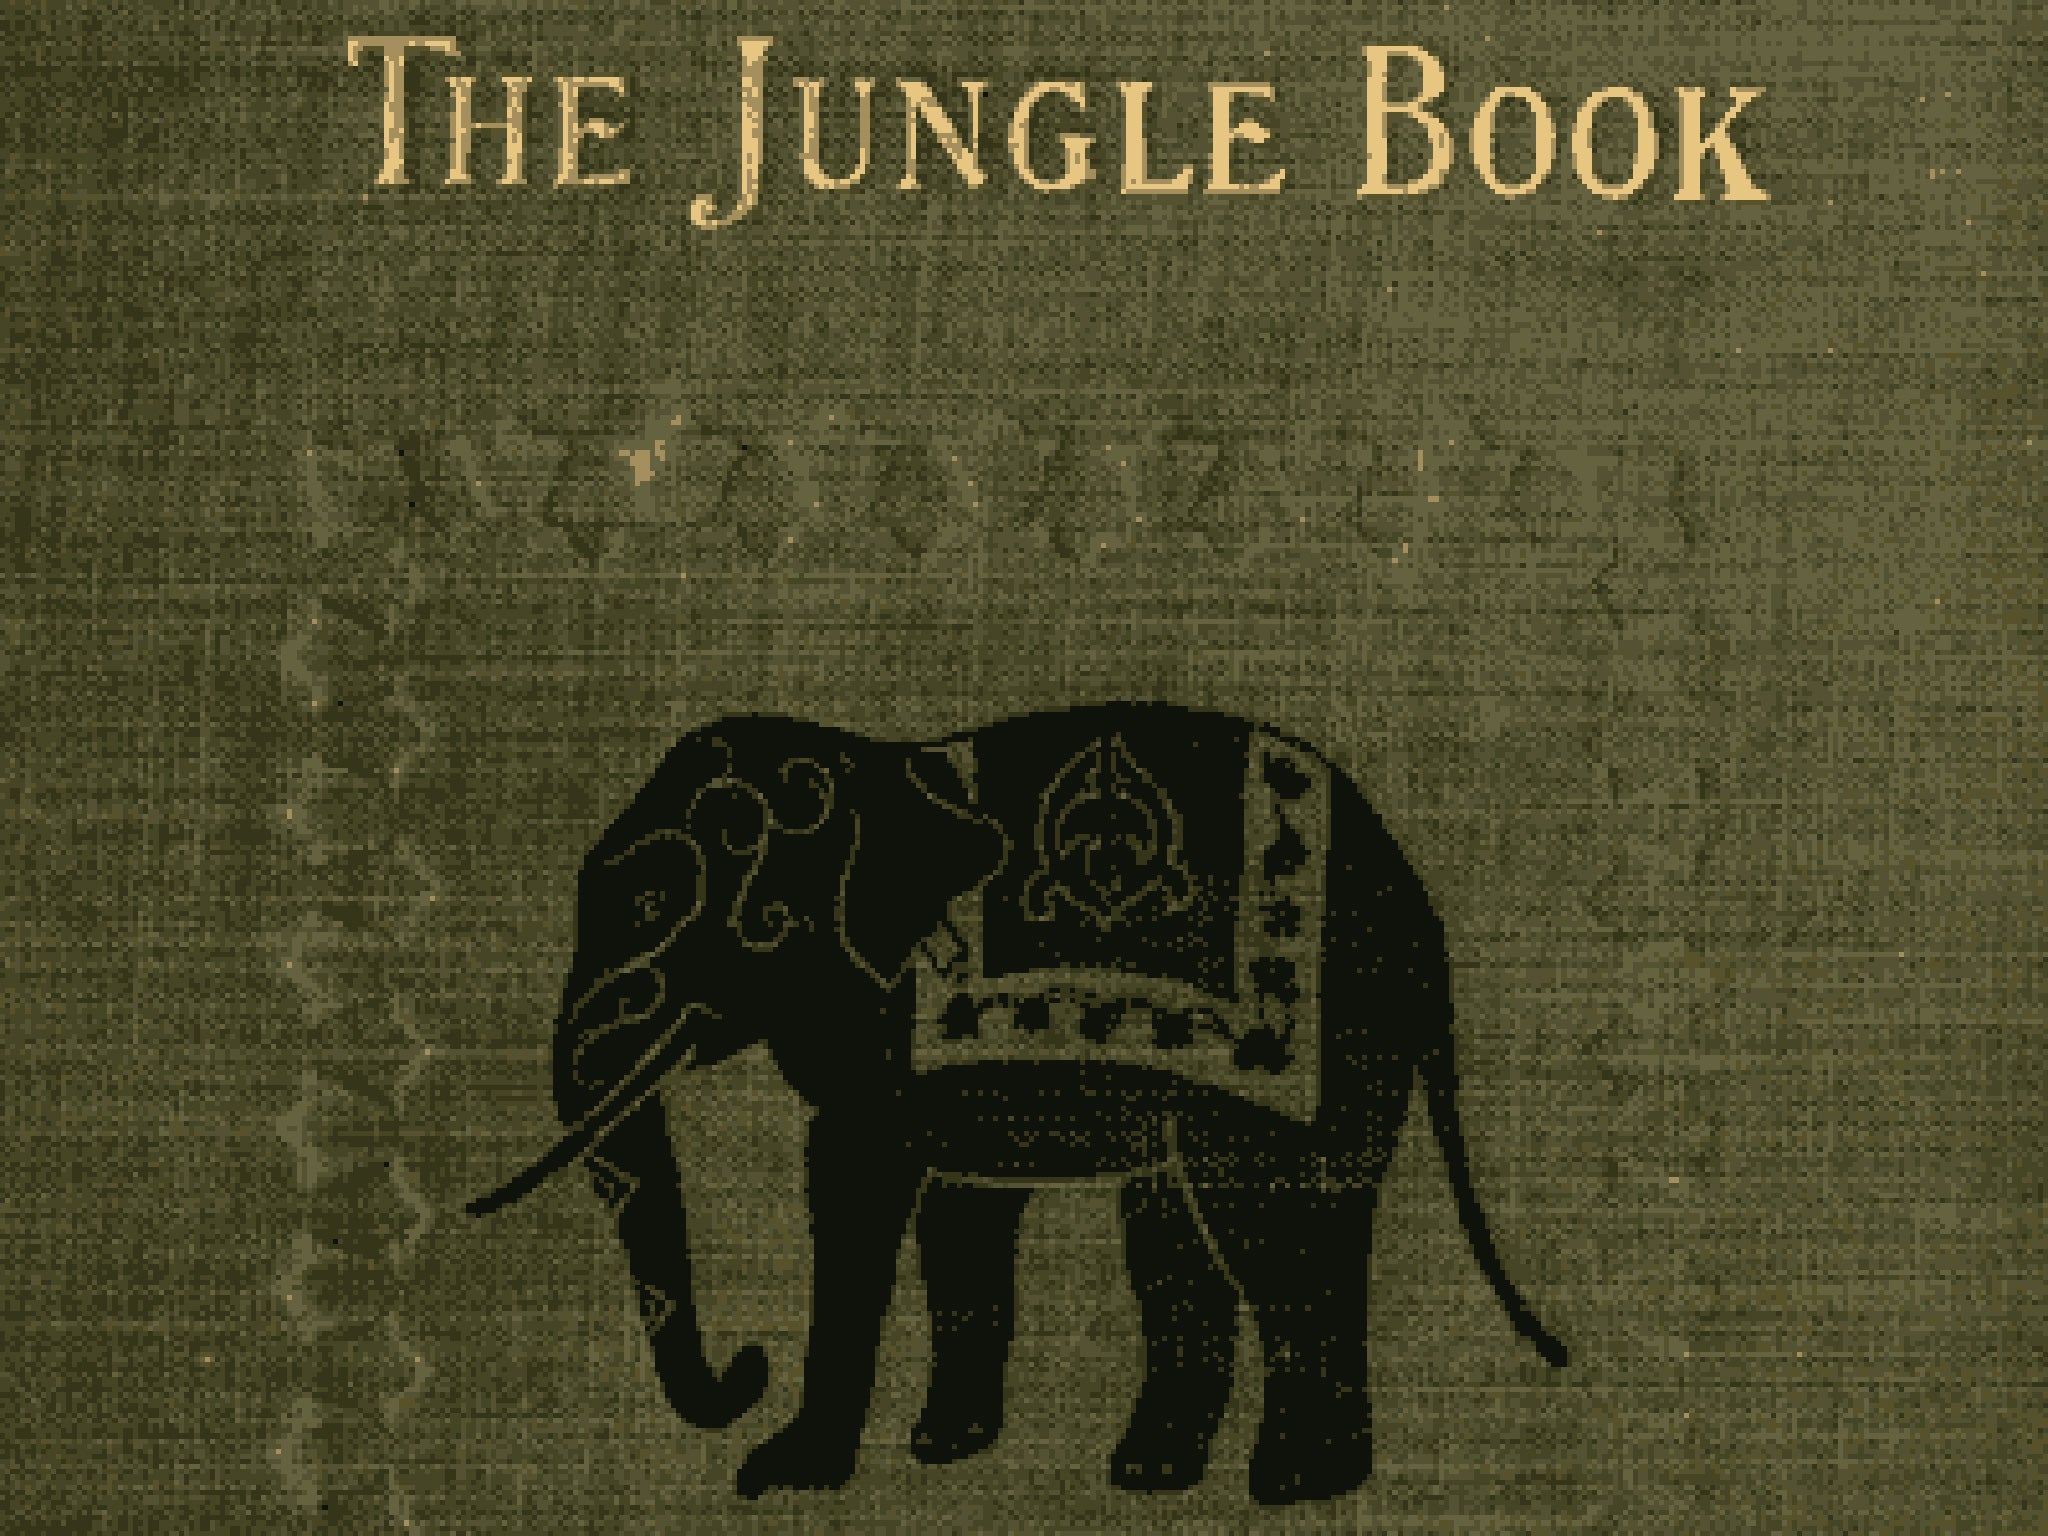 Many books have initially been rejected by publishers including Rudyard Kipling's The Jungle Book